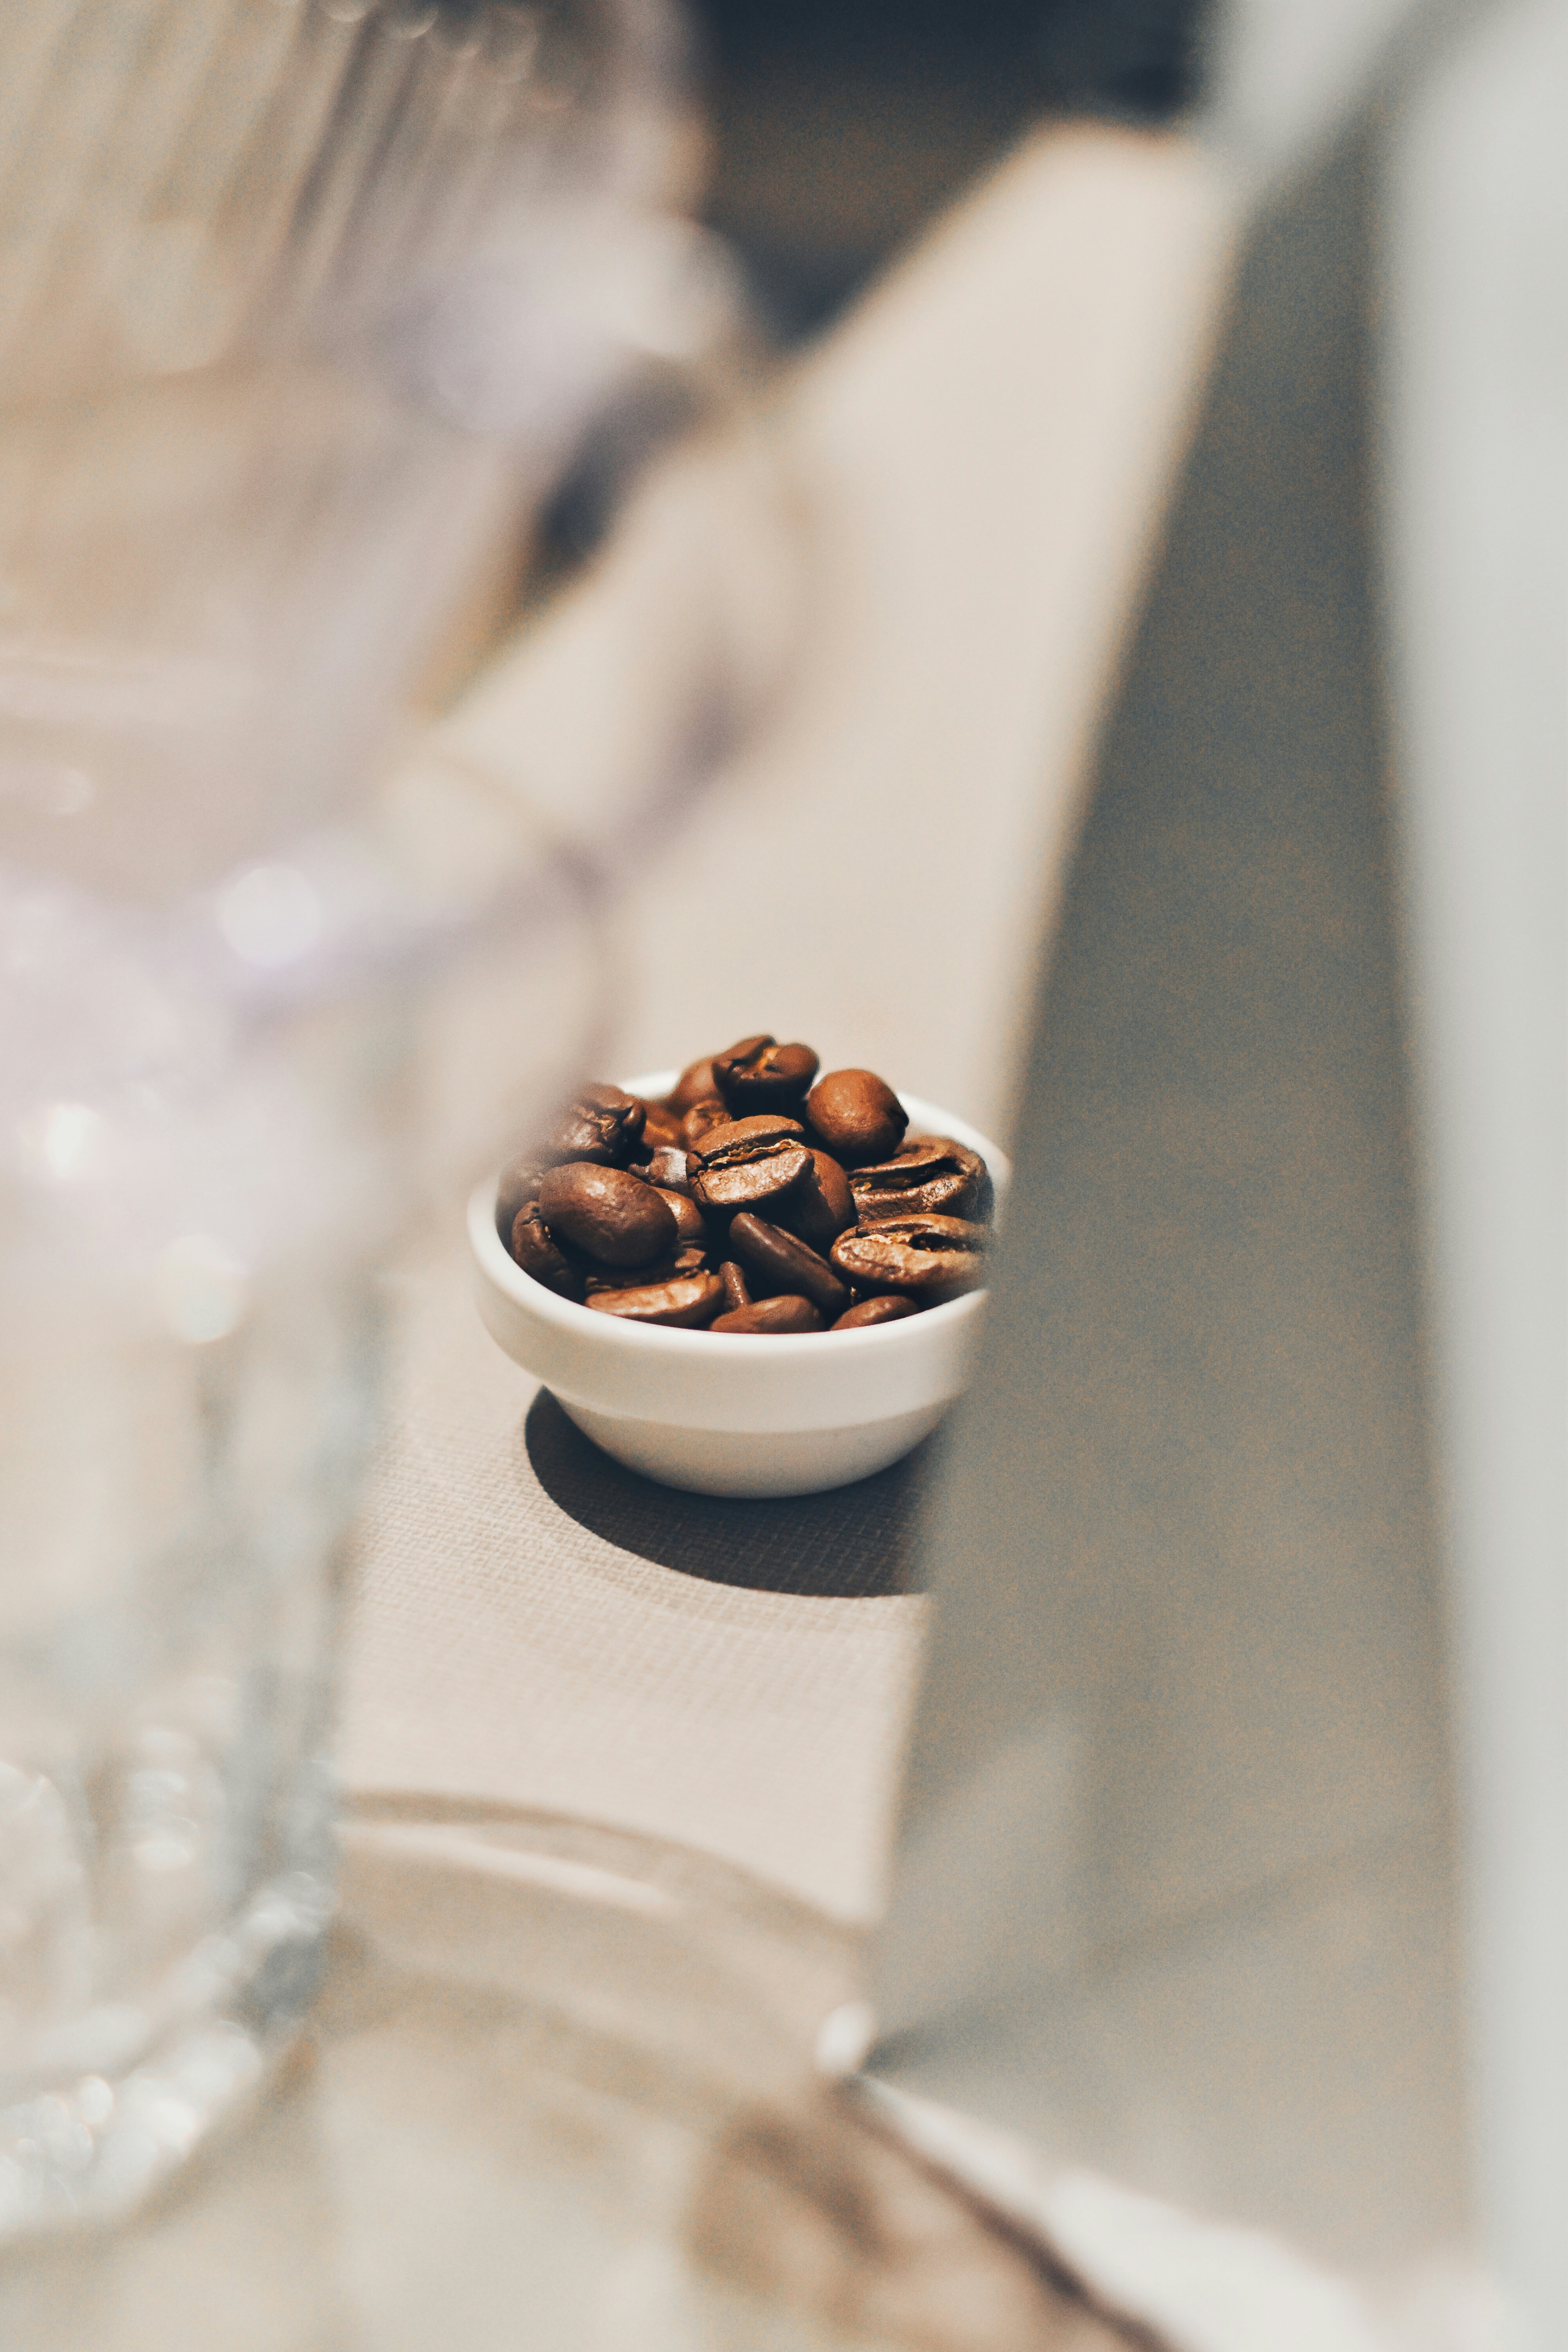 a bowl of coffee beans sitting on a table